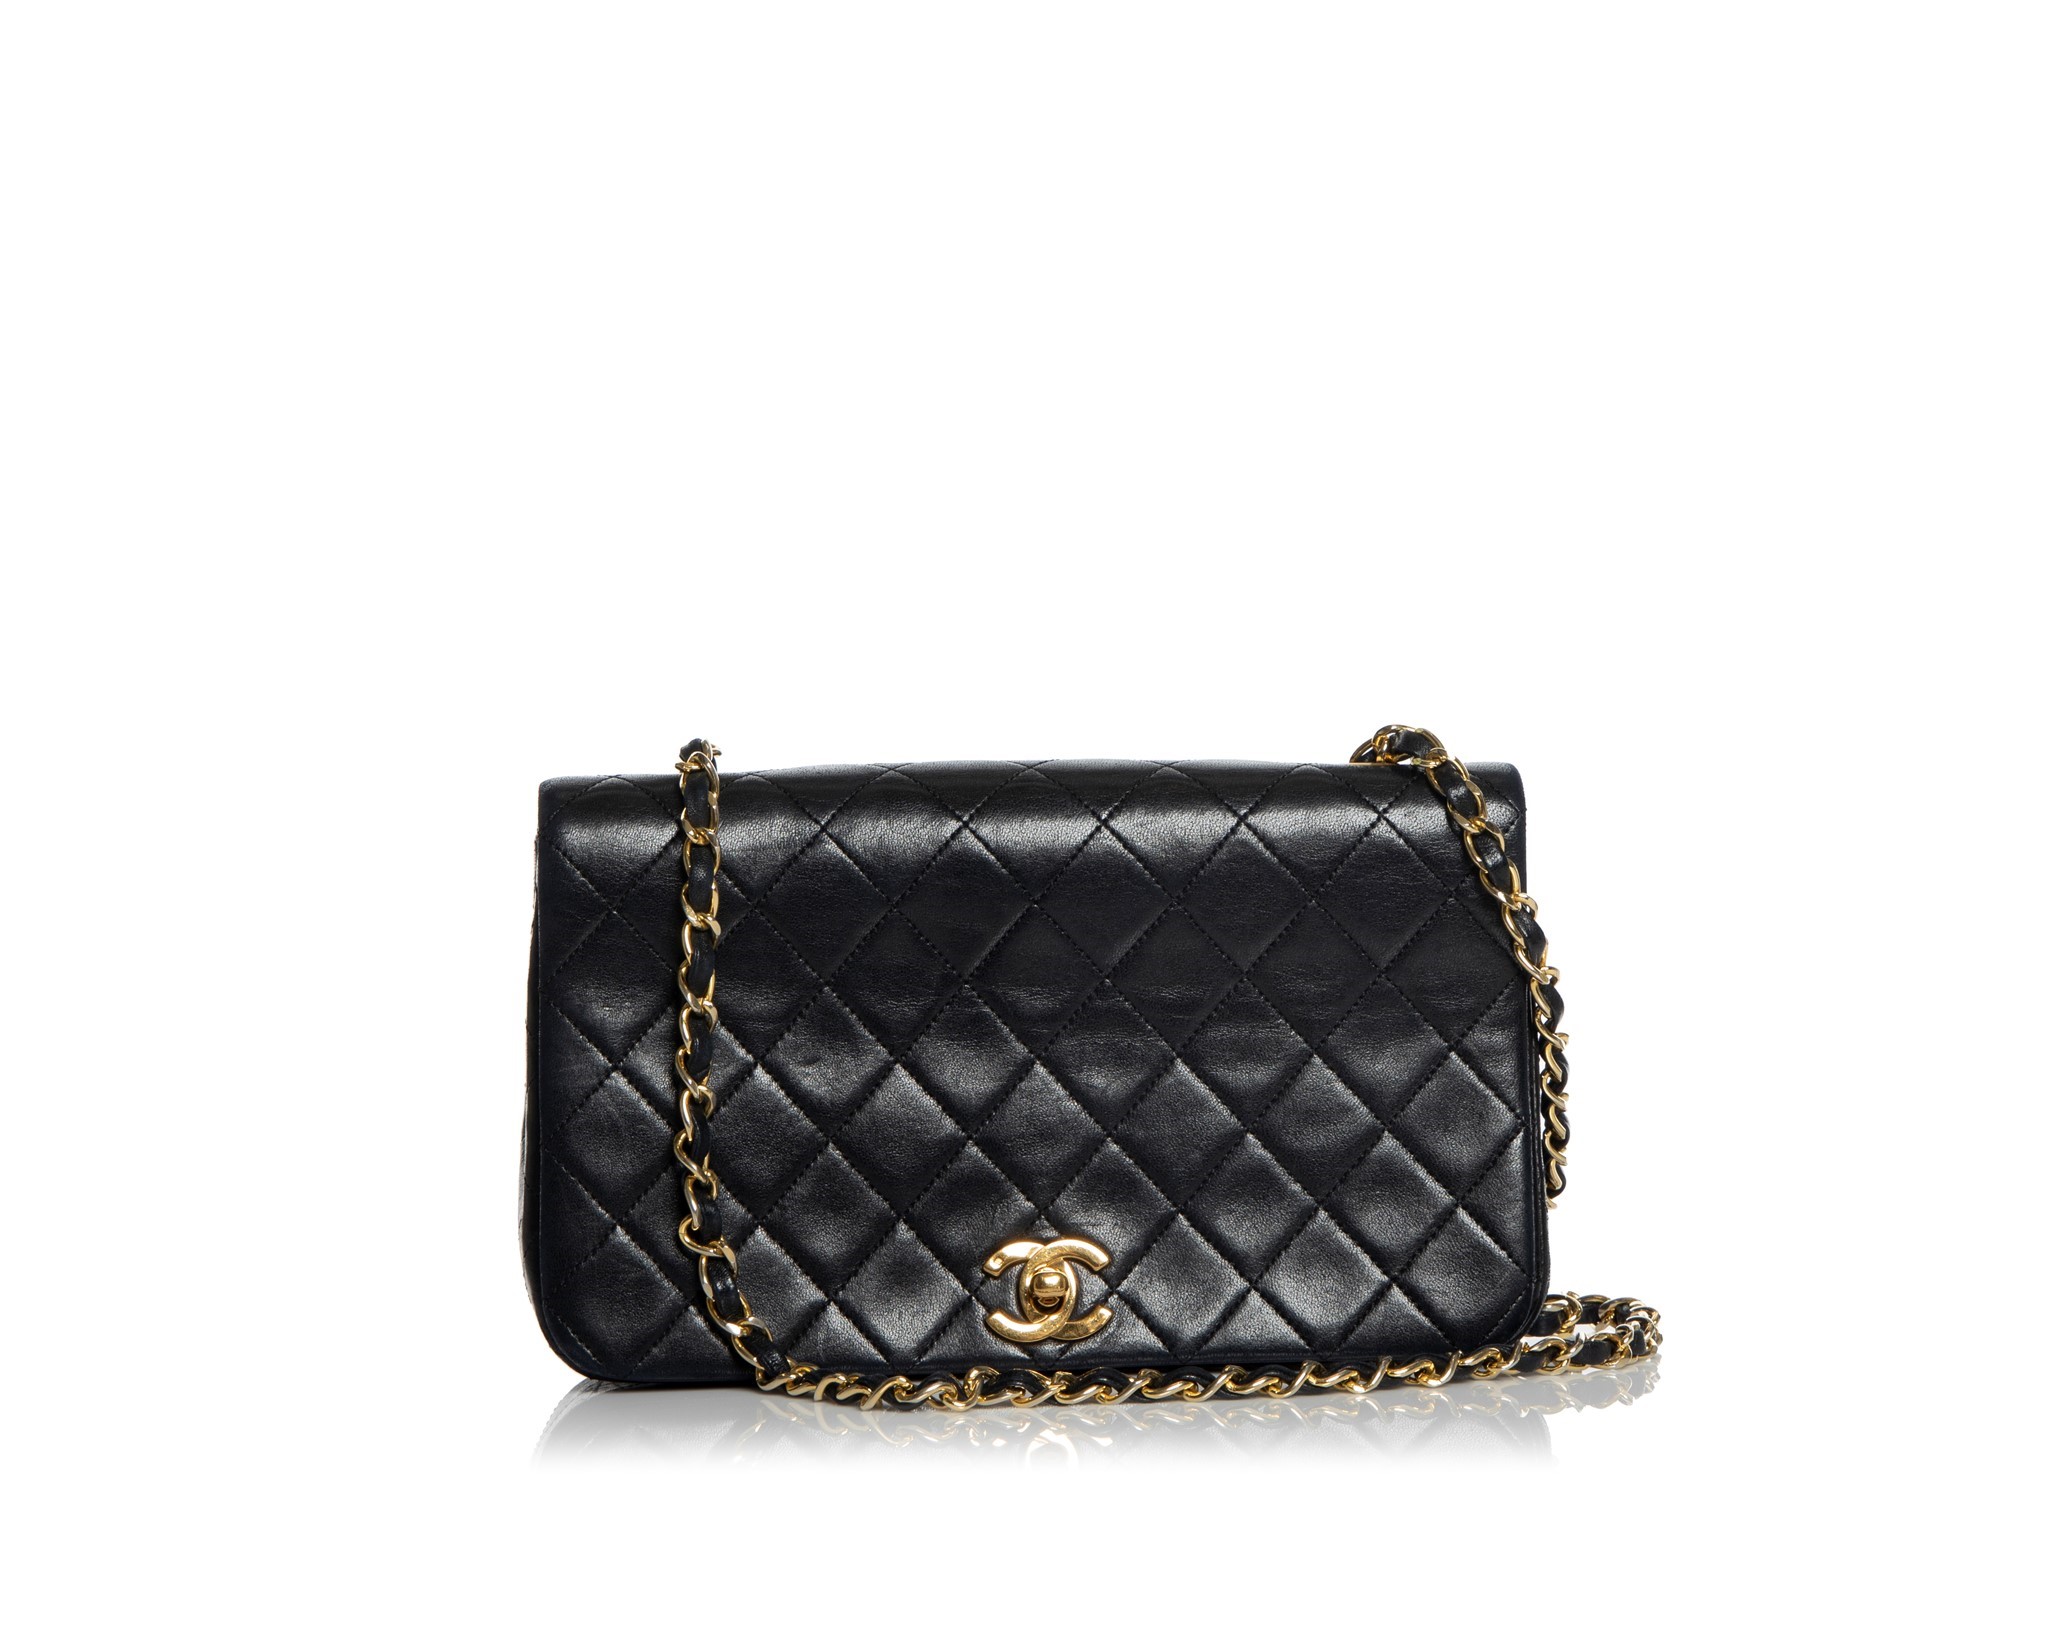 Vintage Black Chanel Flap: The ultimate accessory to elevate your look